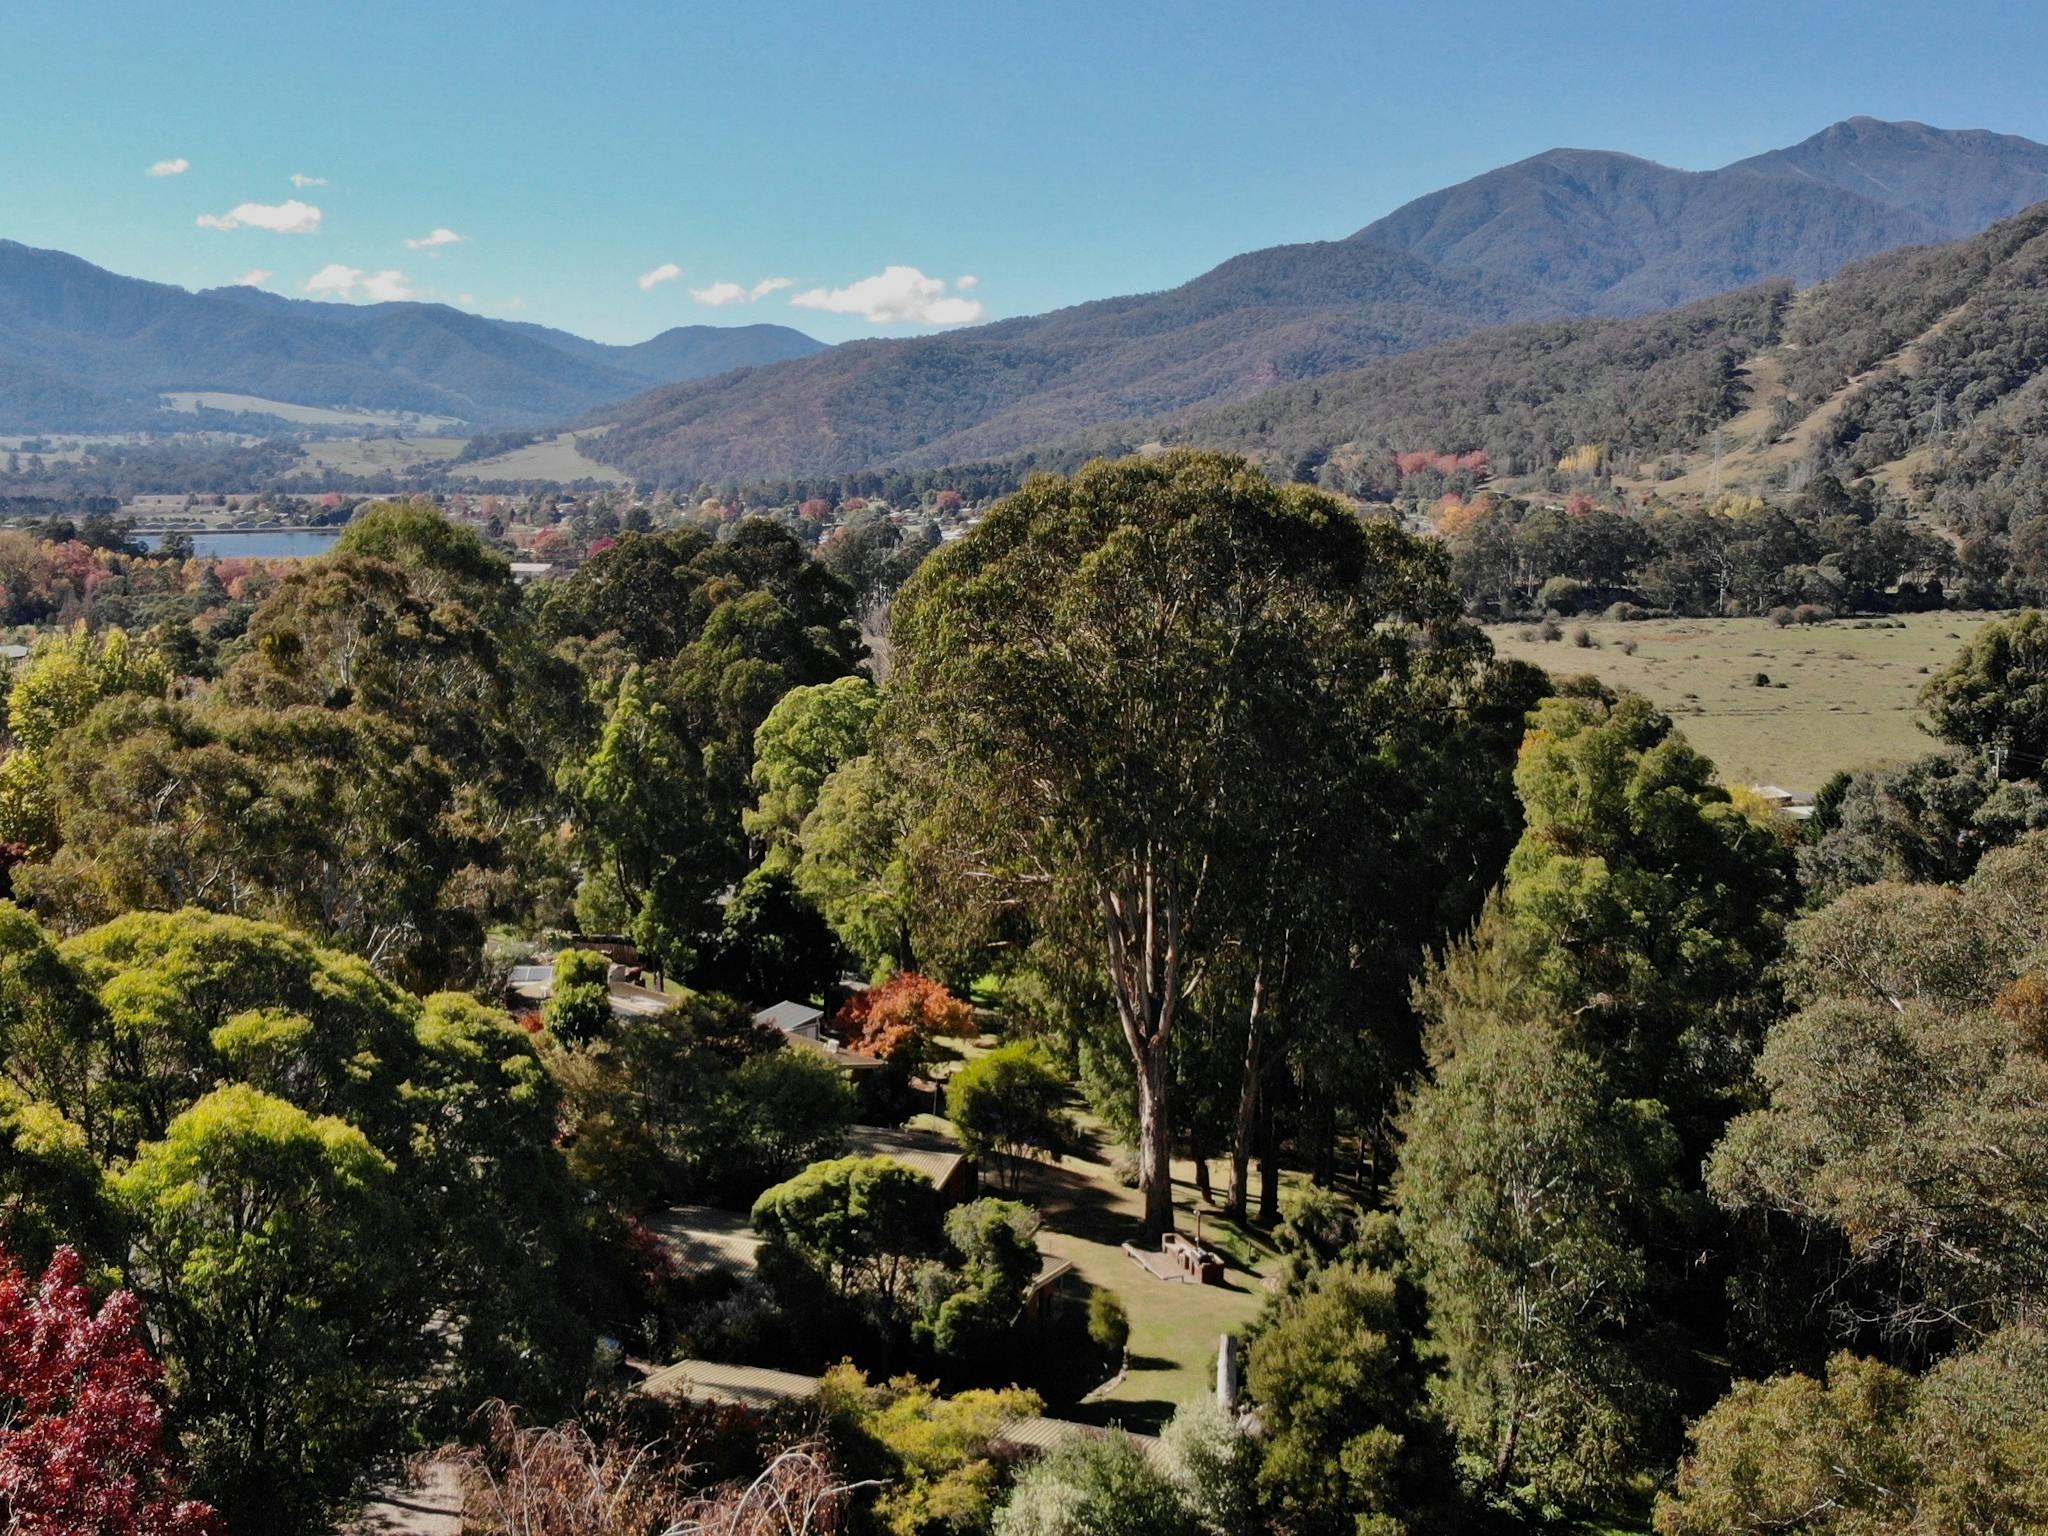 View from above the cottages, looking towards Mt Bogong and Mt Beauty township